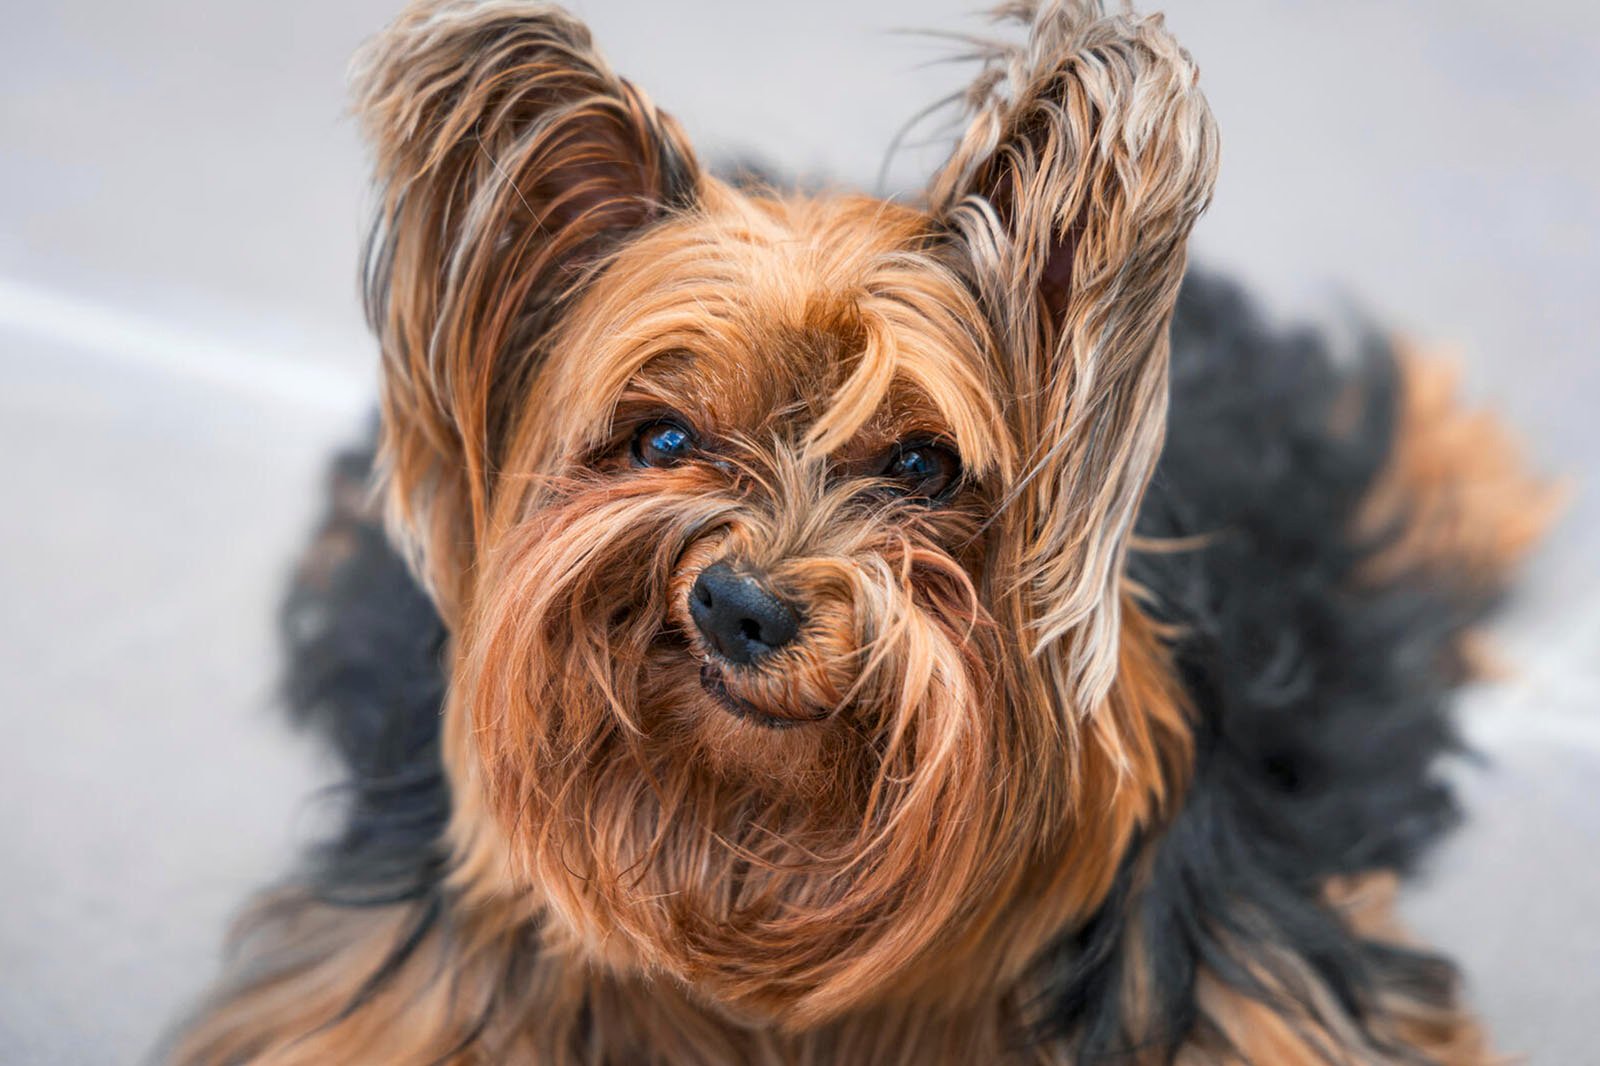 Close-up of a Yorkshire Terrier with glossy tan and black fur, looking directly at the camera with alert, perky ears.